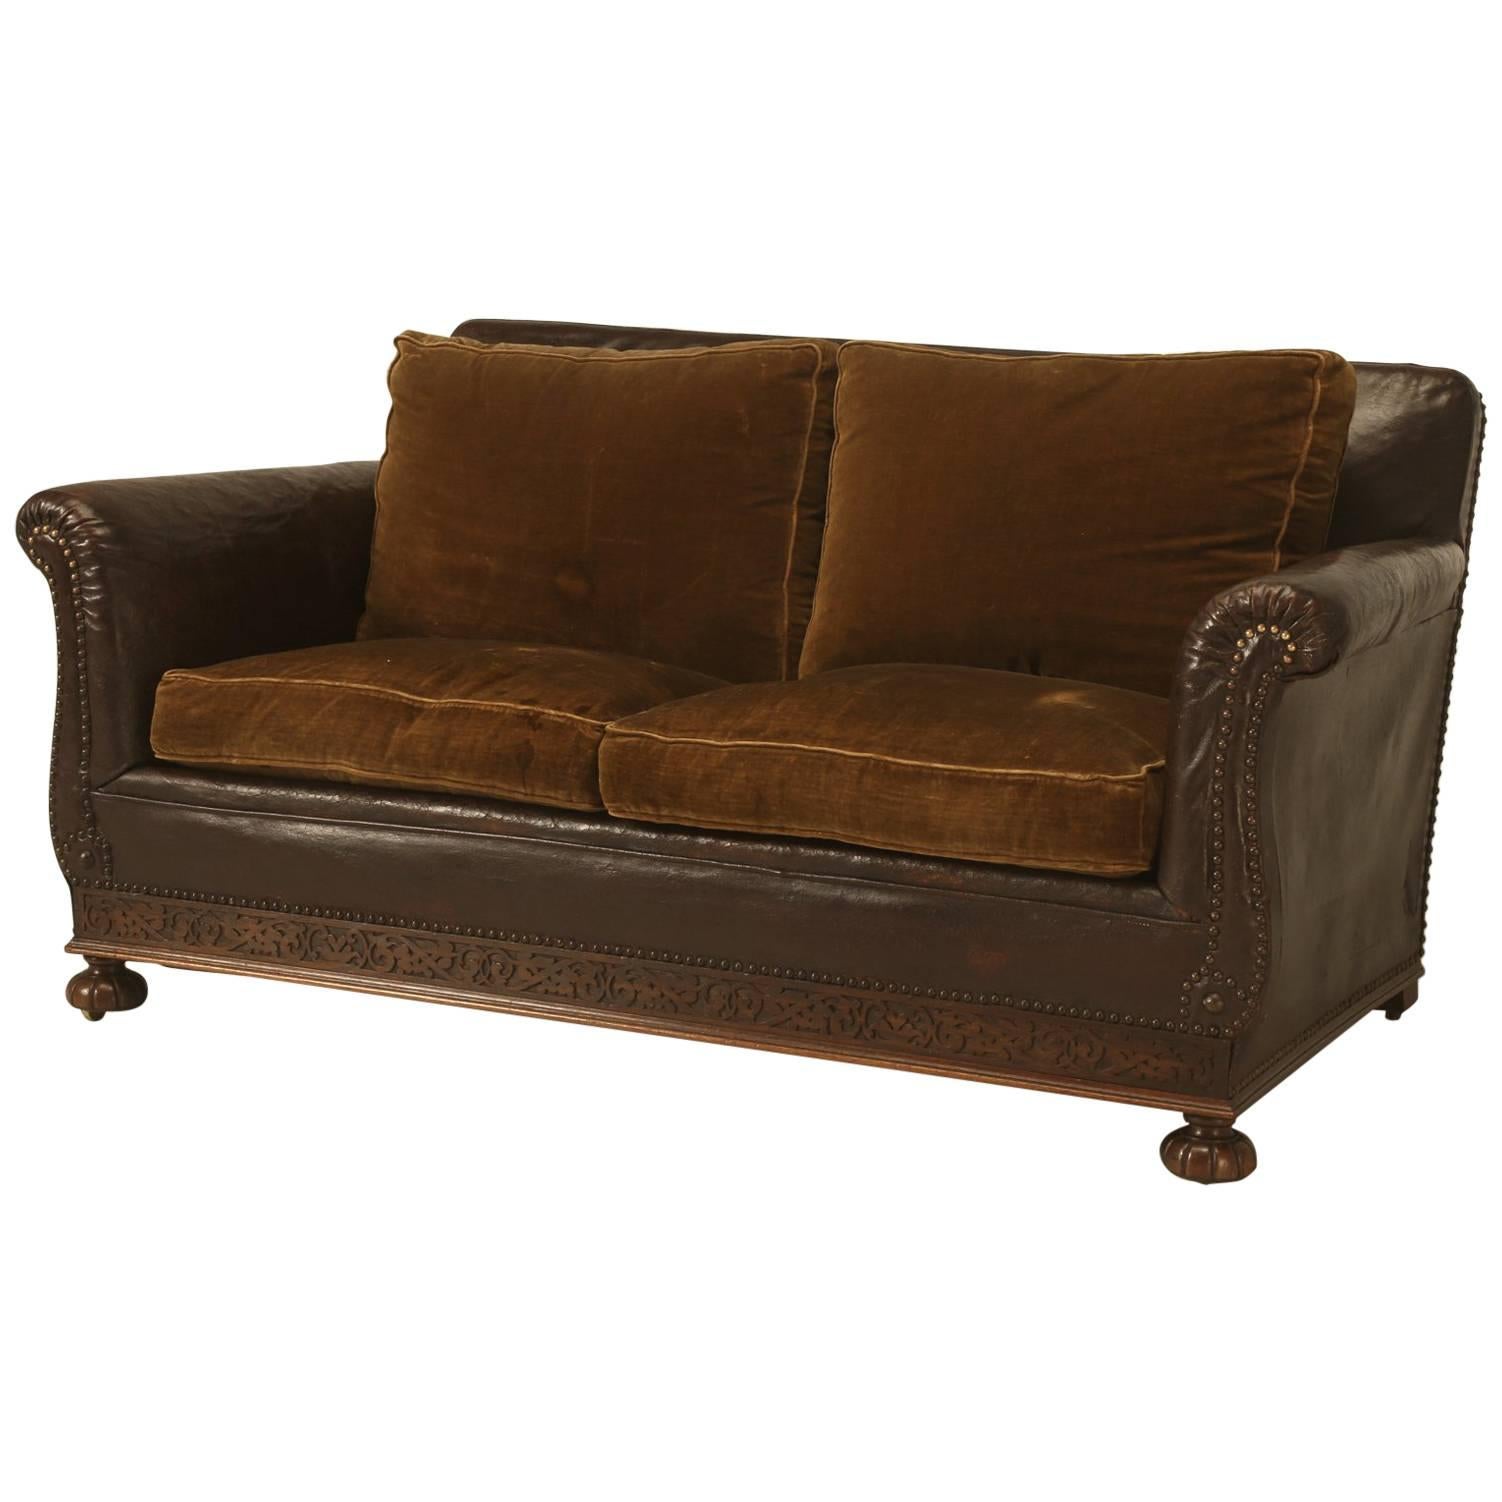 Antique French Leather and Velvet Settee from the 1930s